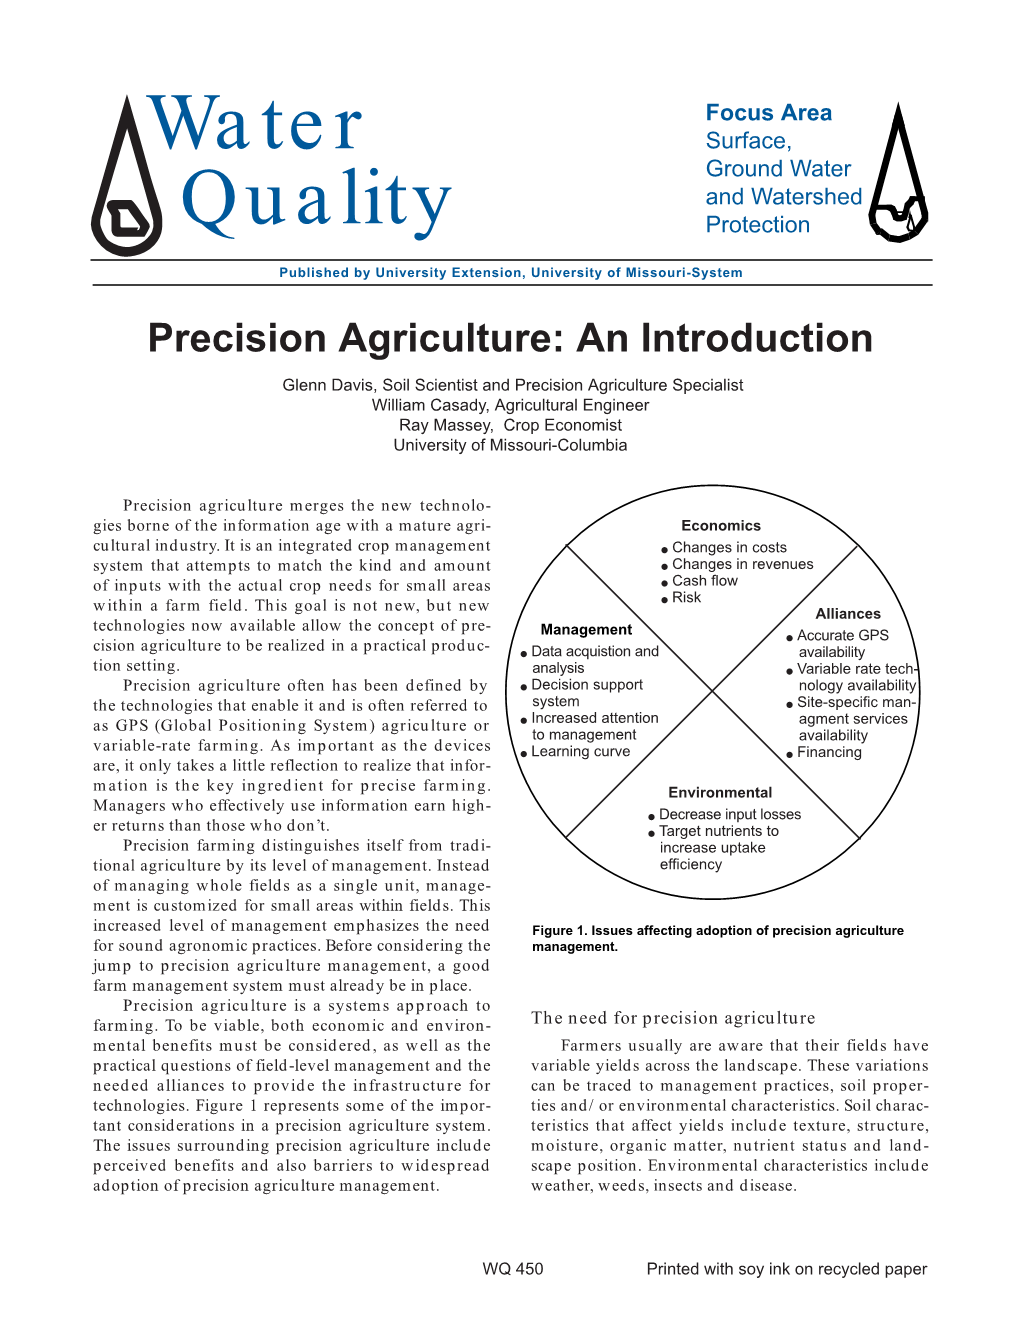 Precision Agriculture: an Introduction